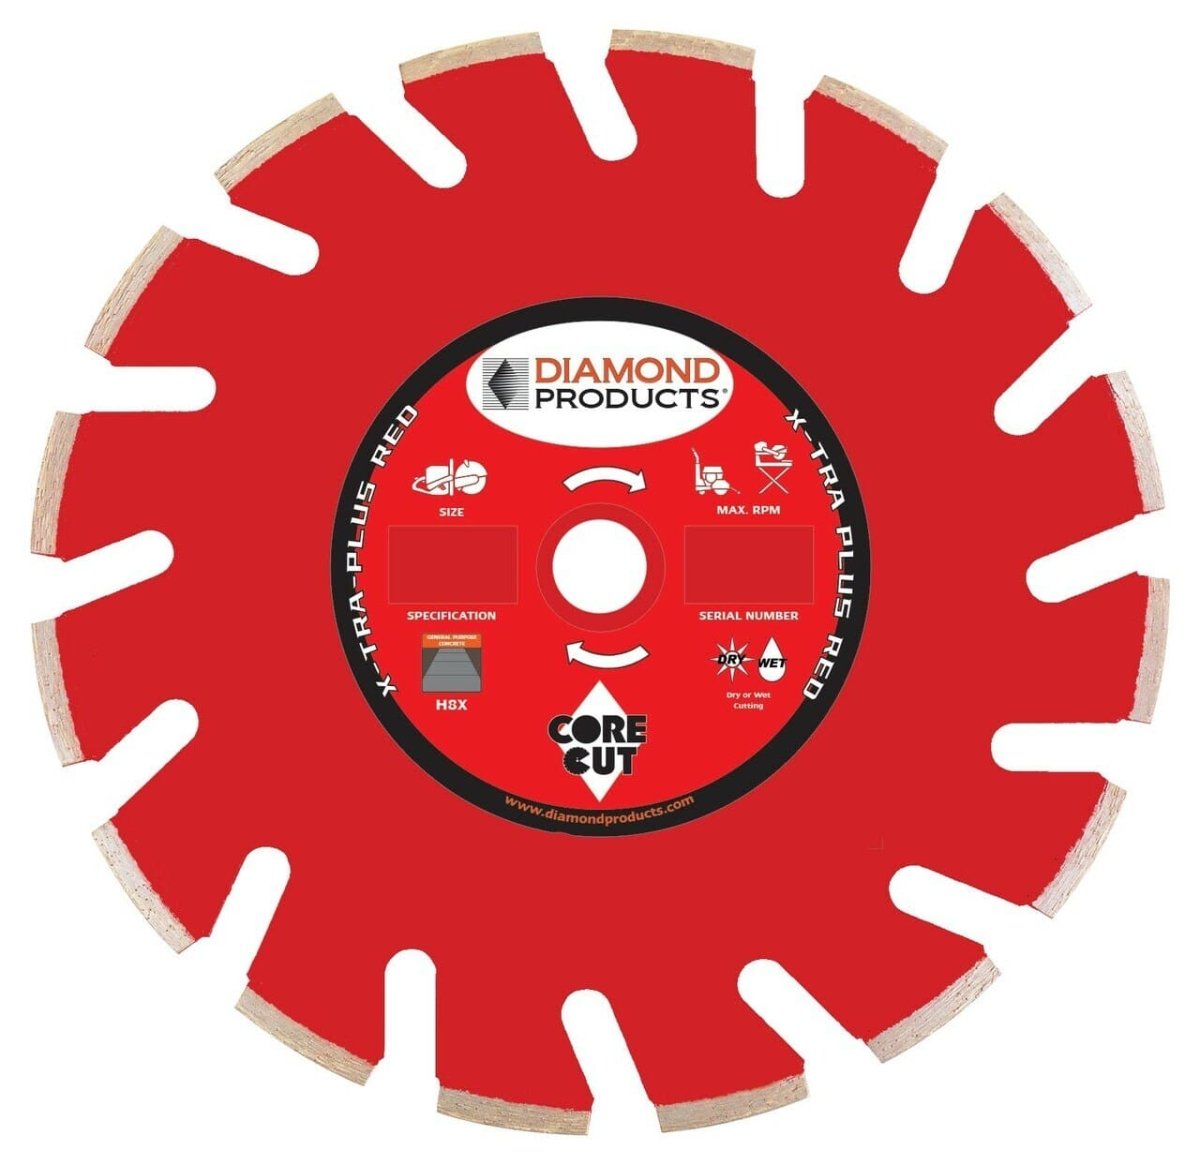 X-Tra Plus Red Ultimate for Concrete - H8XU - Diamond Products